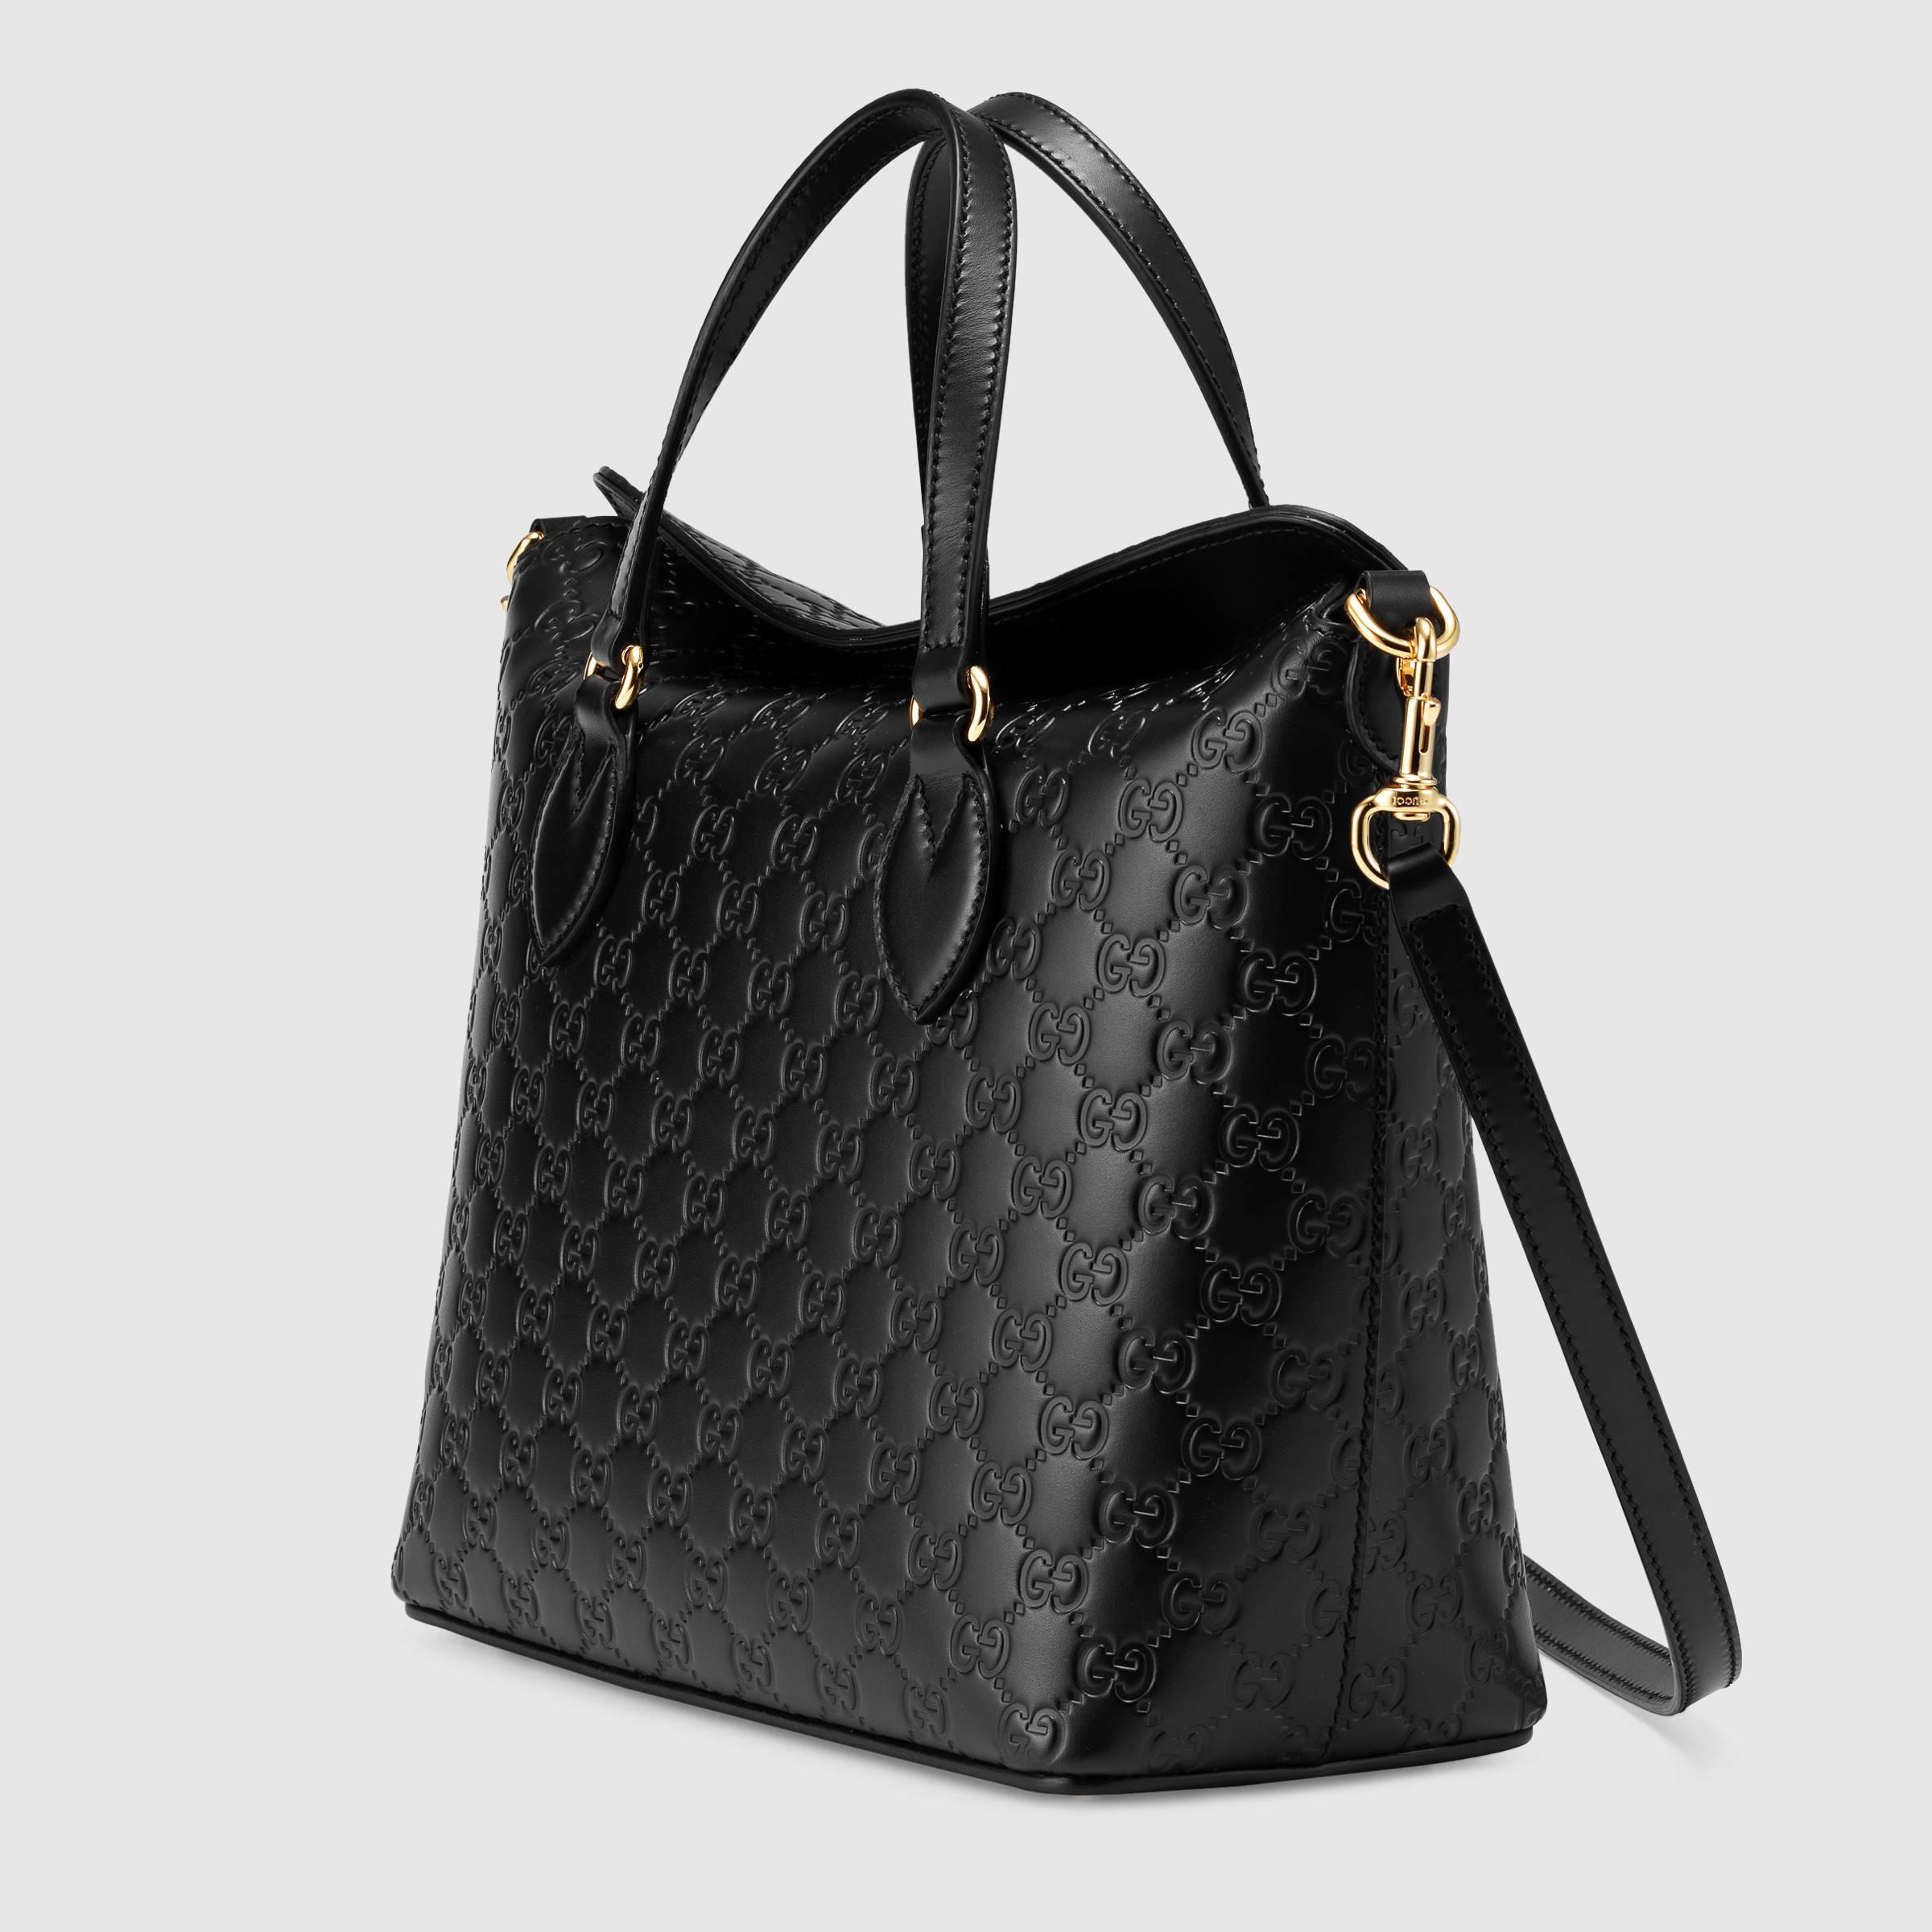 Gucci Black Tote Bags | Literacy Ontario Central South